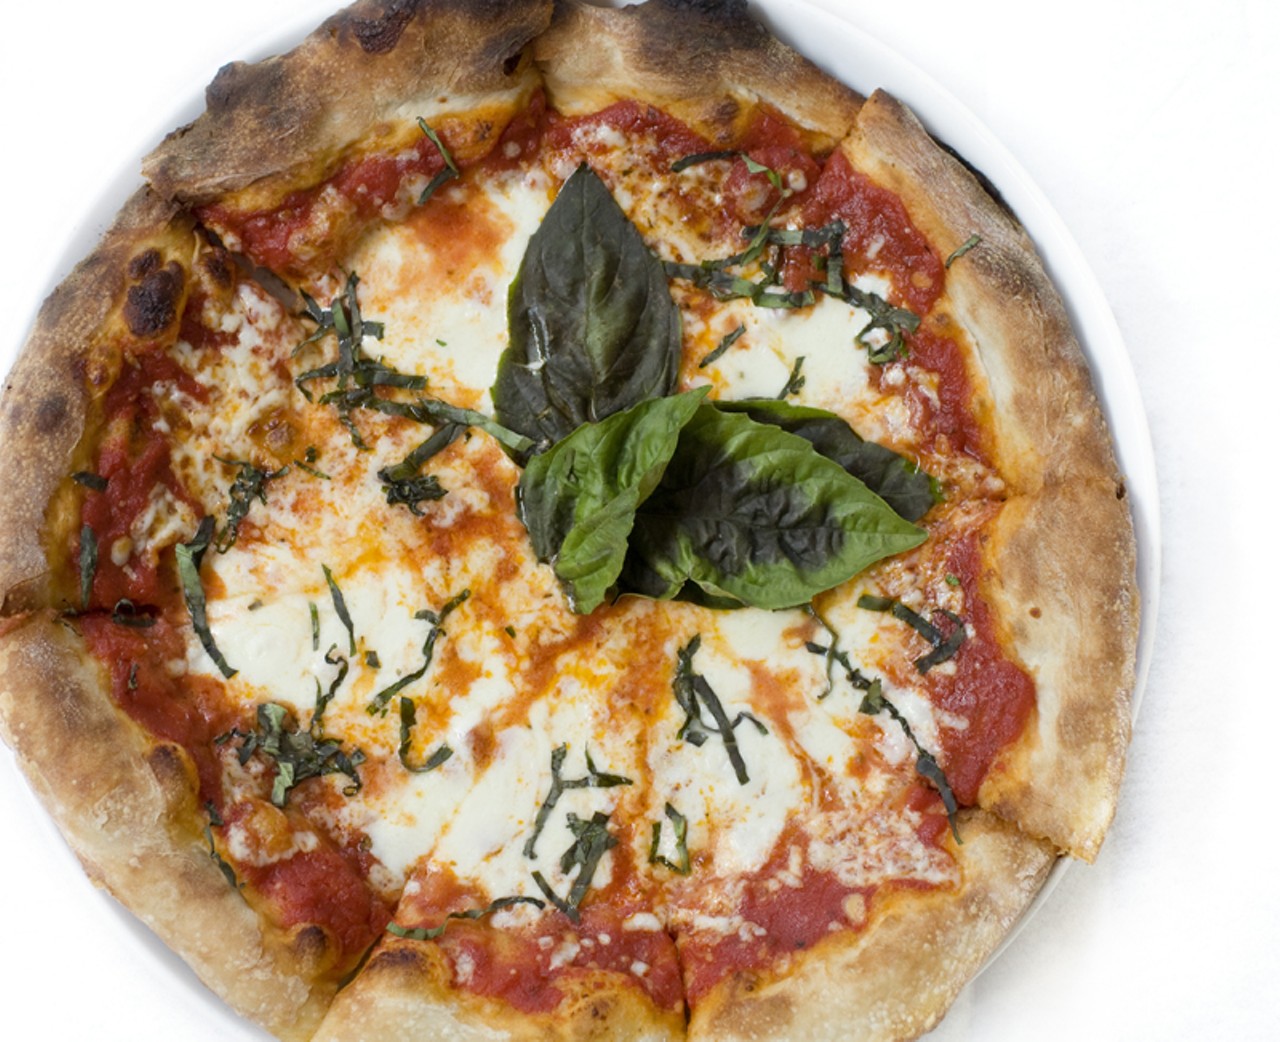 The Margherita pizza. It is a rustic pizza made with Roma tomatoes, fresh mozzarella, fresh basil and Parmesan cheese.